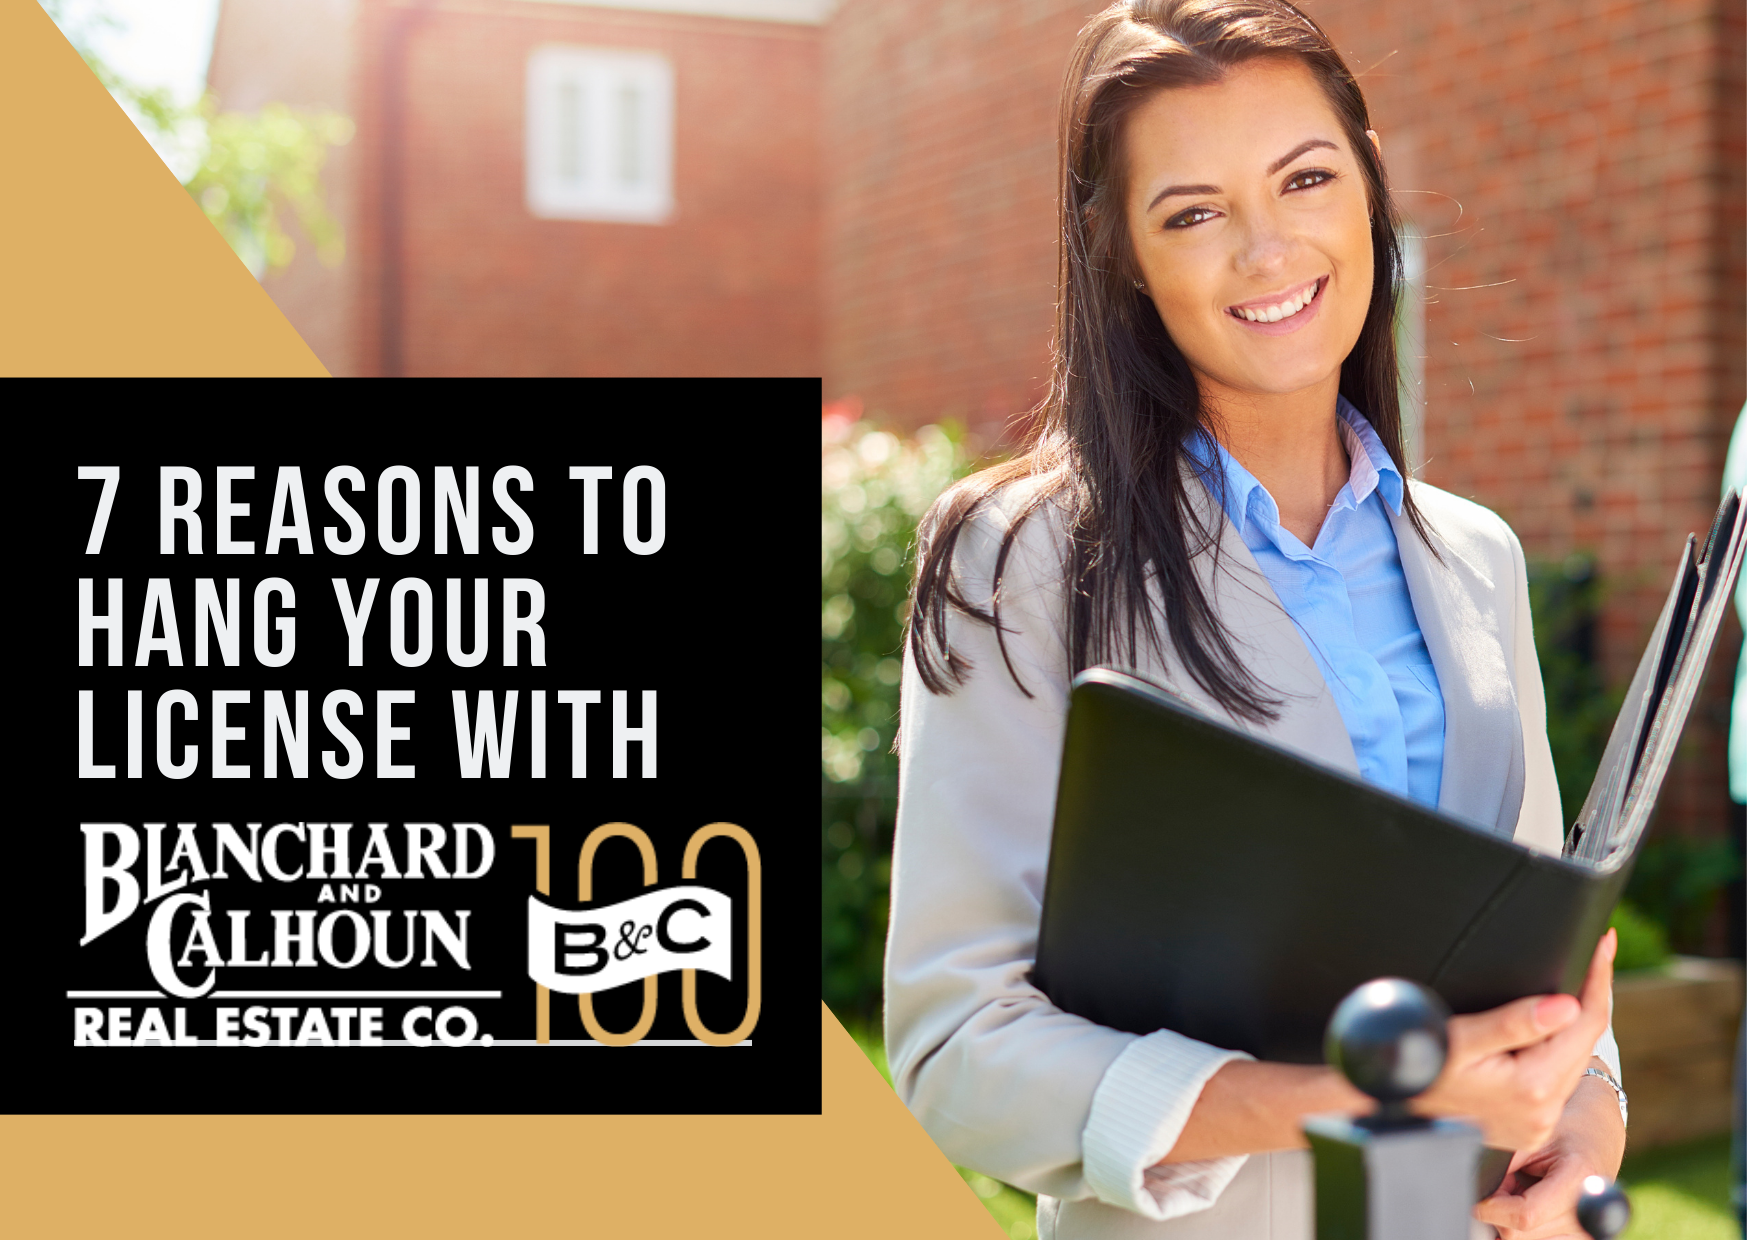 7 Reasons to Hang Your License with Blancard & Calhoun Real Estate